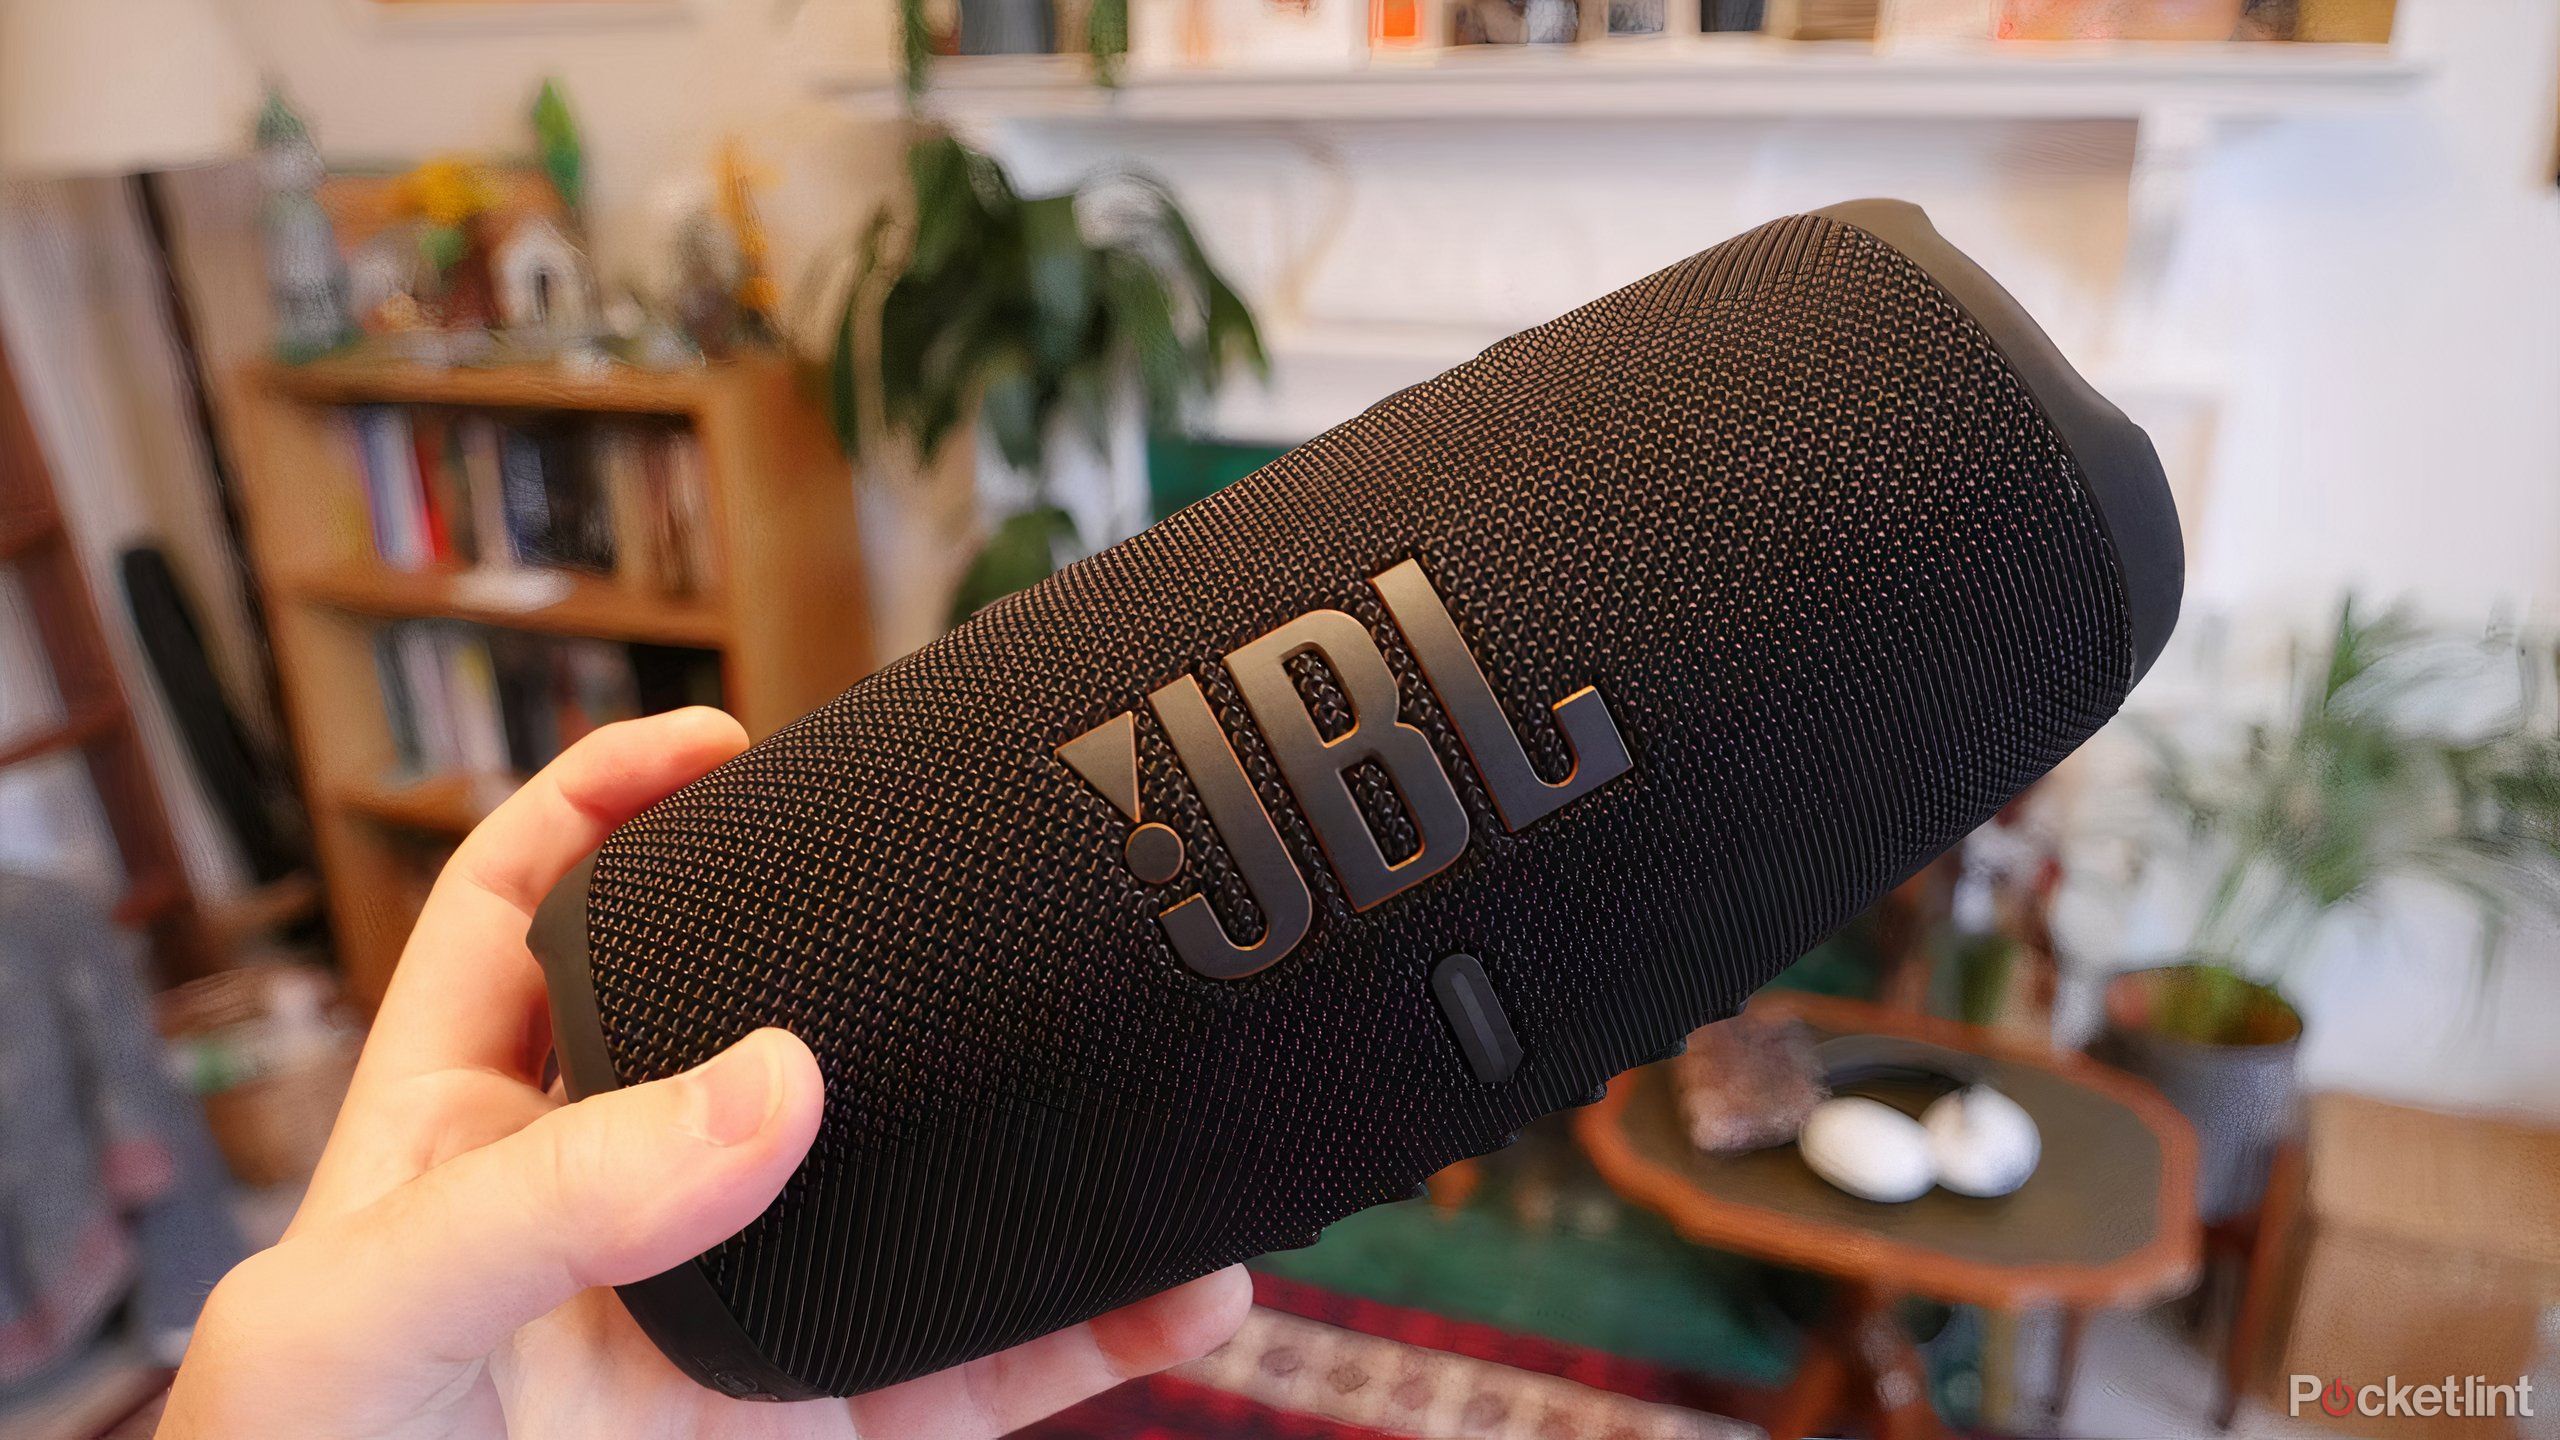 Holding the JBL charge 5 Wi-Fi in hand.